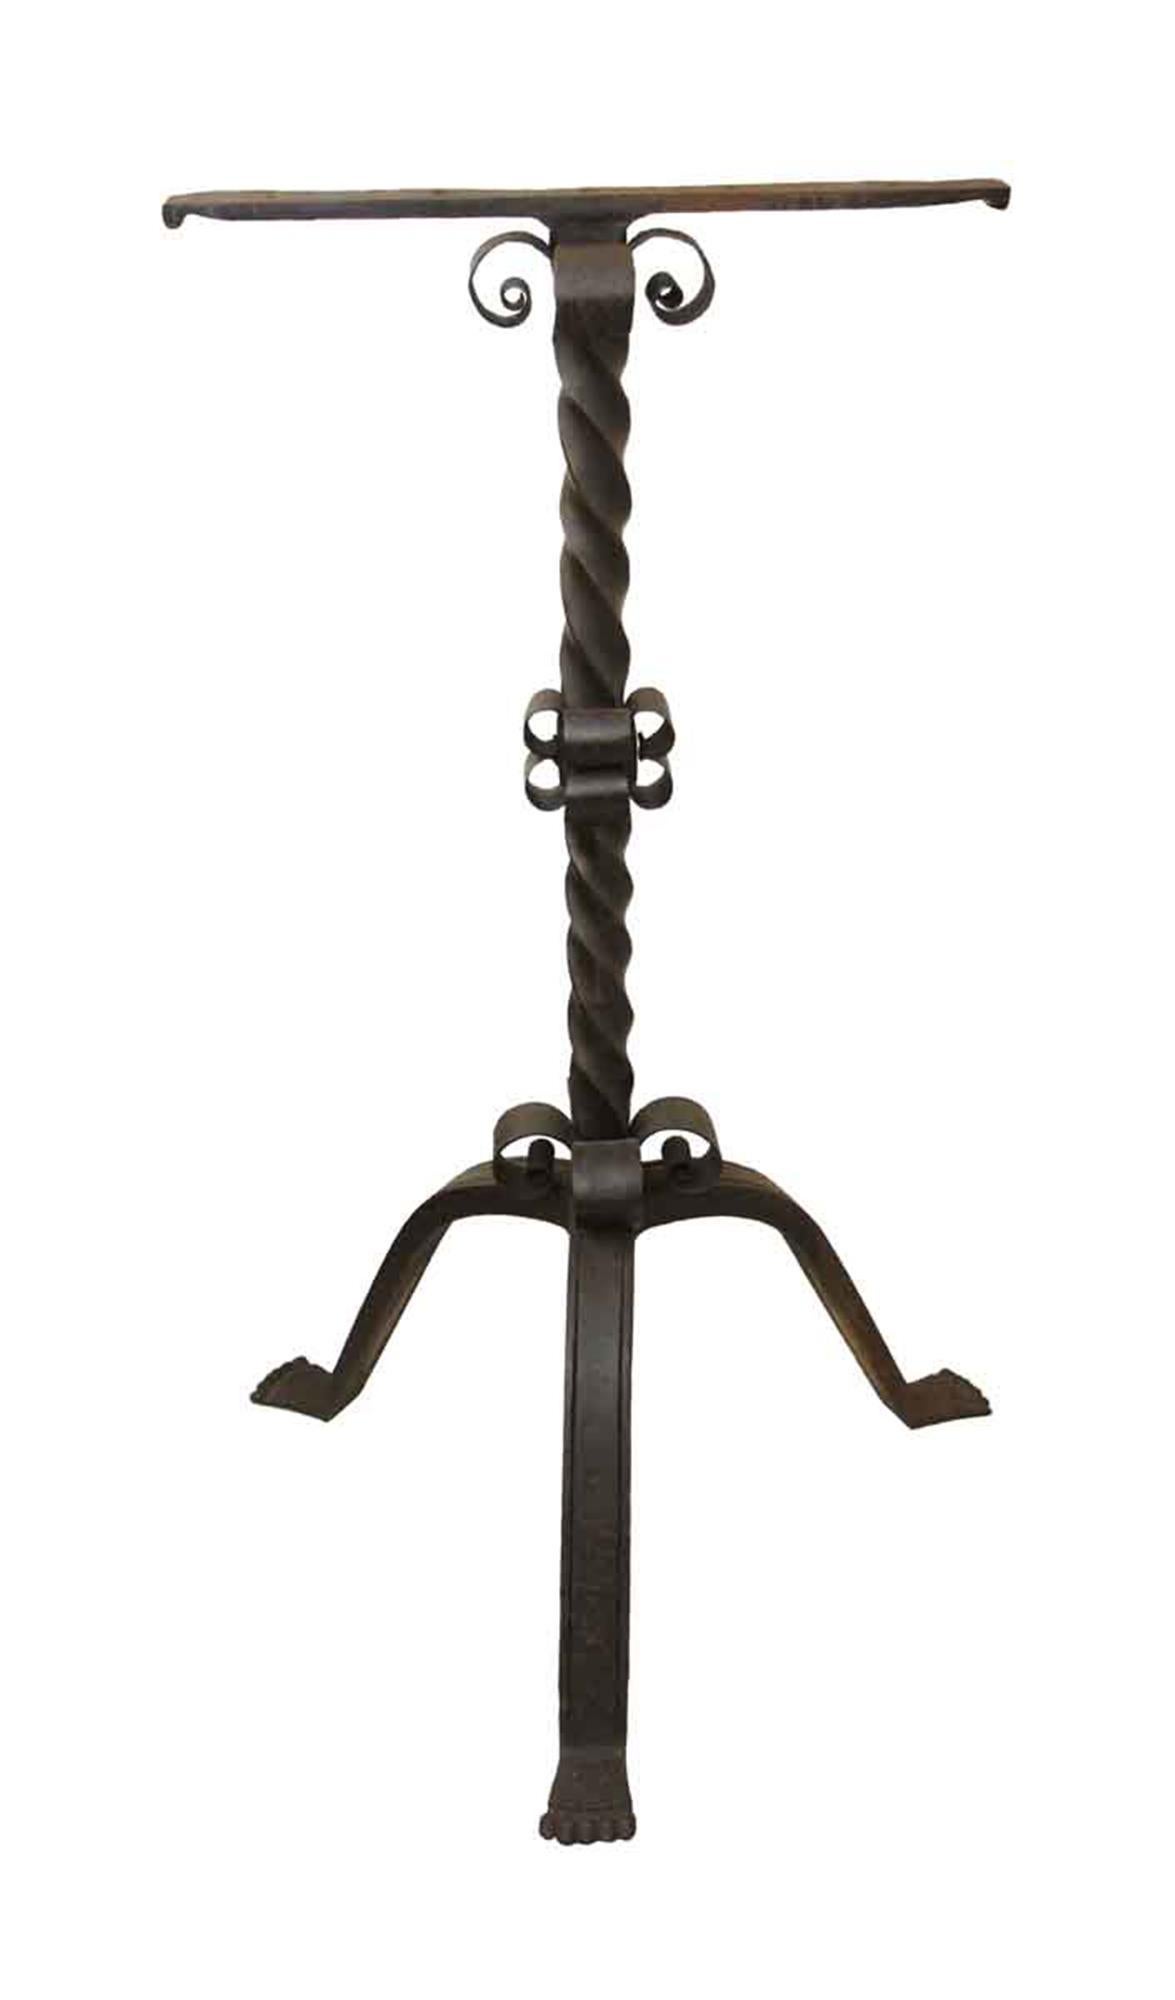 Large Samuel Yellin signed forged iron Stand or base with three legs and a black finish. This can be seen at our 2420 Broadway location on the upper west side in Manhattan.